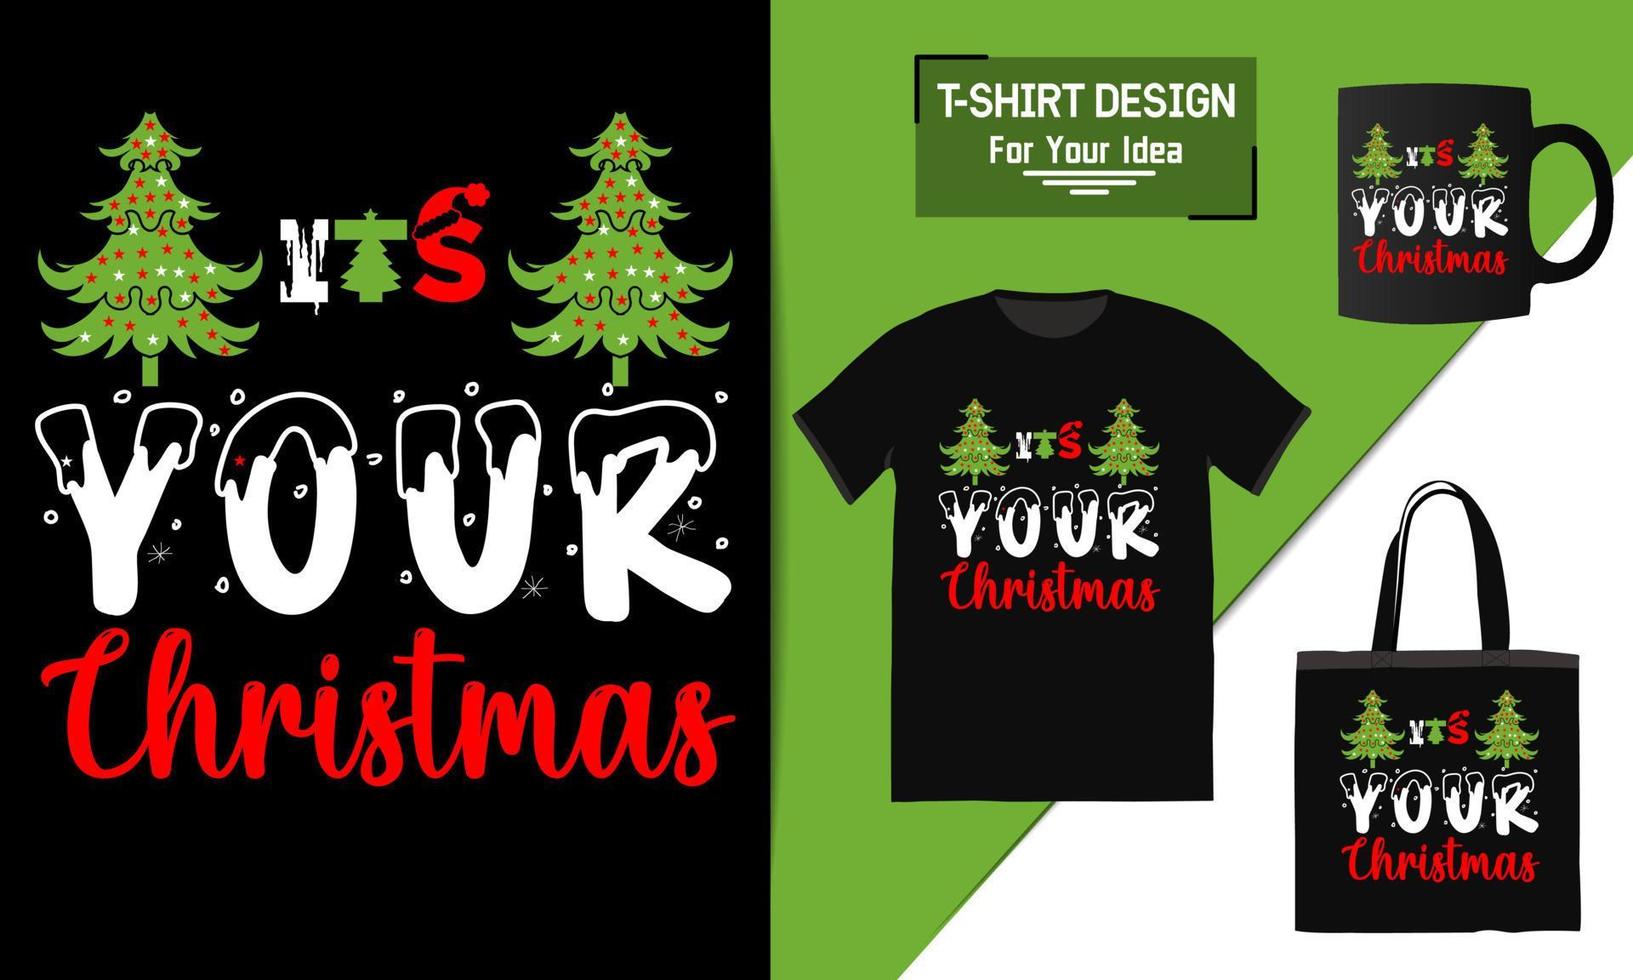 It's your Christmas Lettering Quote, Christmas T-shirt Design, typography vector a mug, and funny Christmas ready for print